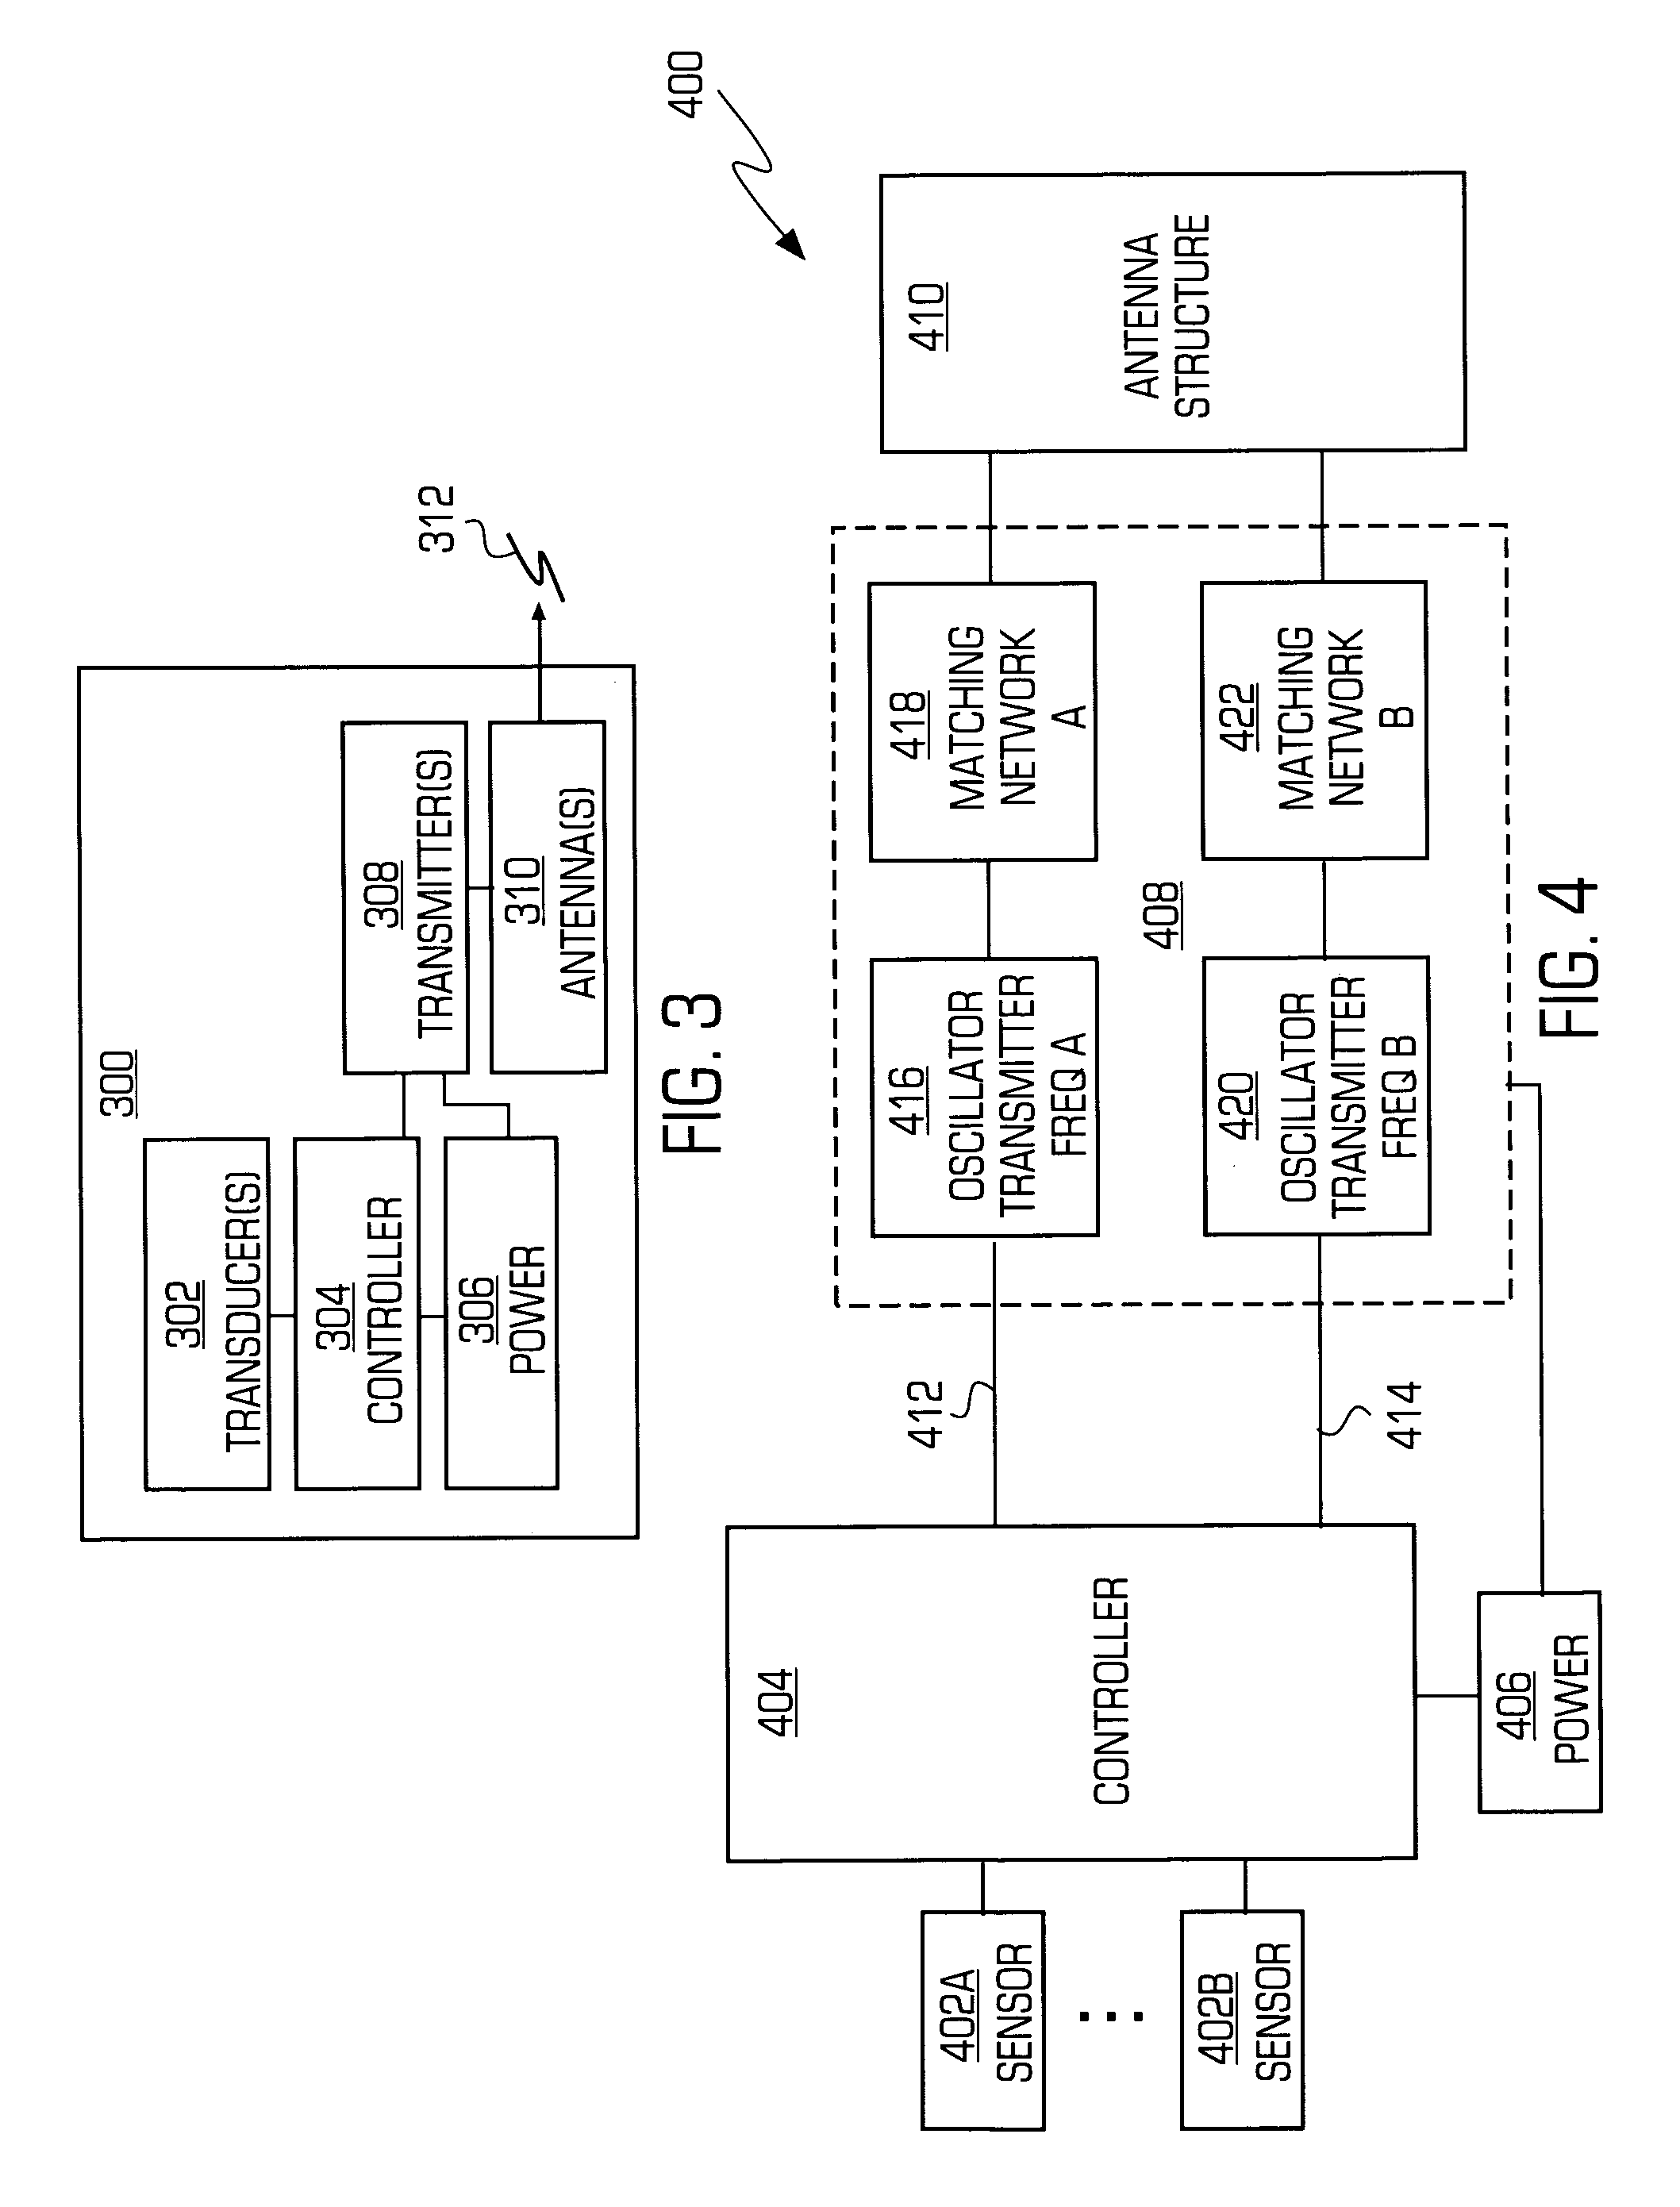 Interference resistant wireless sensor and control system